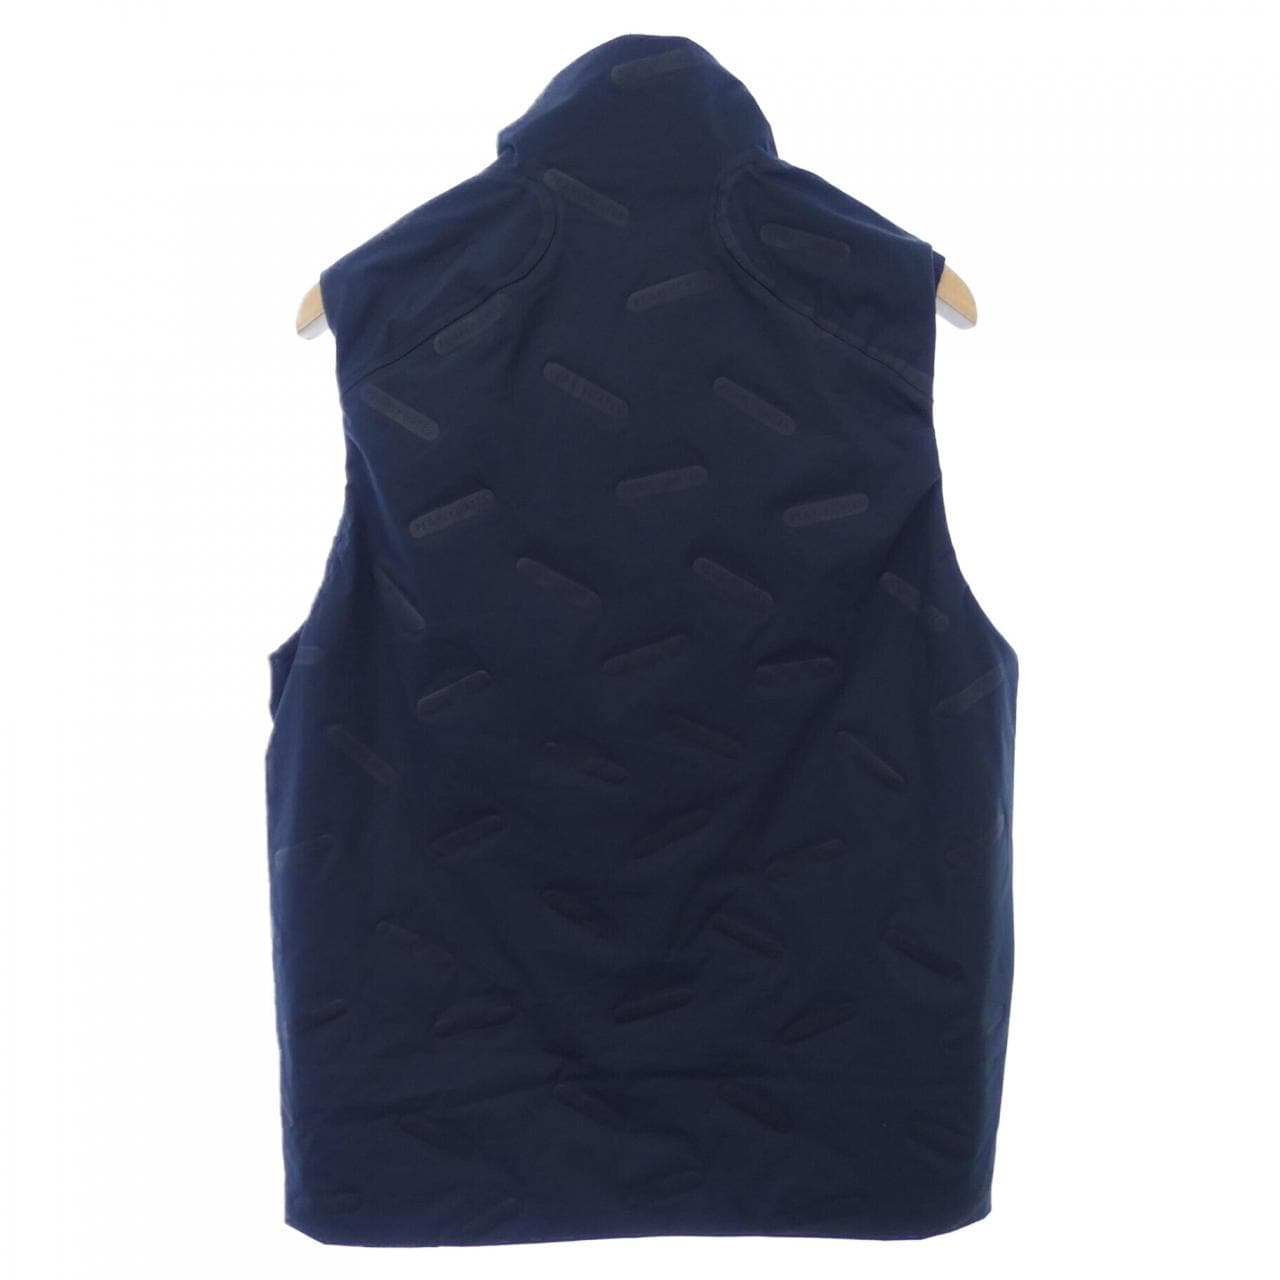 Pearly Gates PEARLY GATES Vest